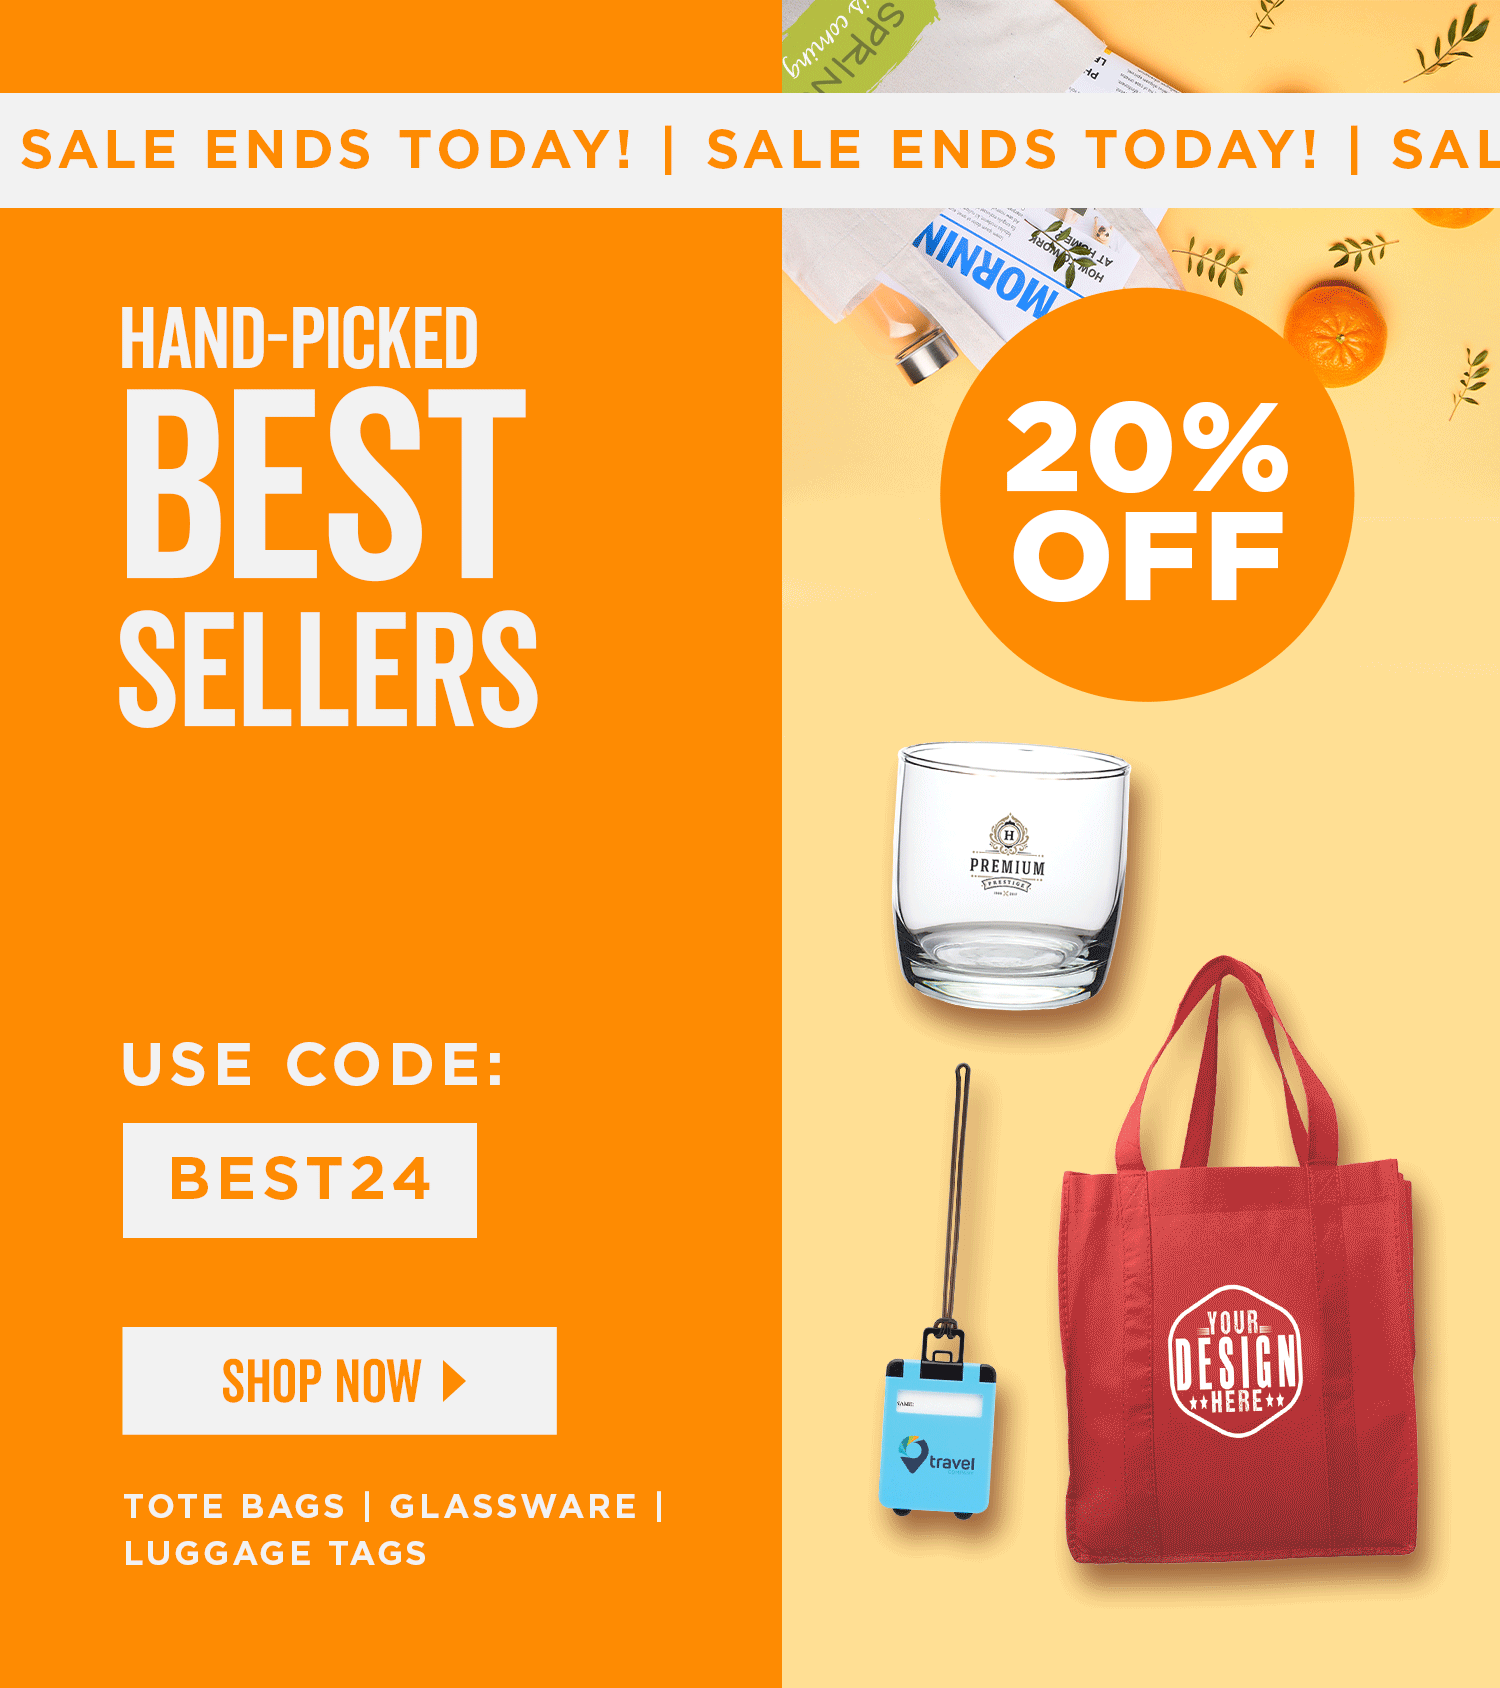 Hand-Picked Best Sellers | 20% Off | Use Code: BEST24 | Shop Now | Discount applied to tote bags, glassware and luggage tags.